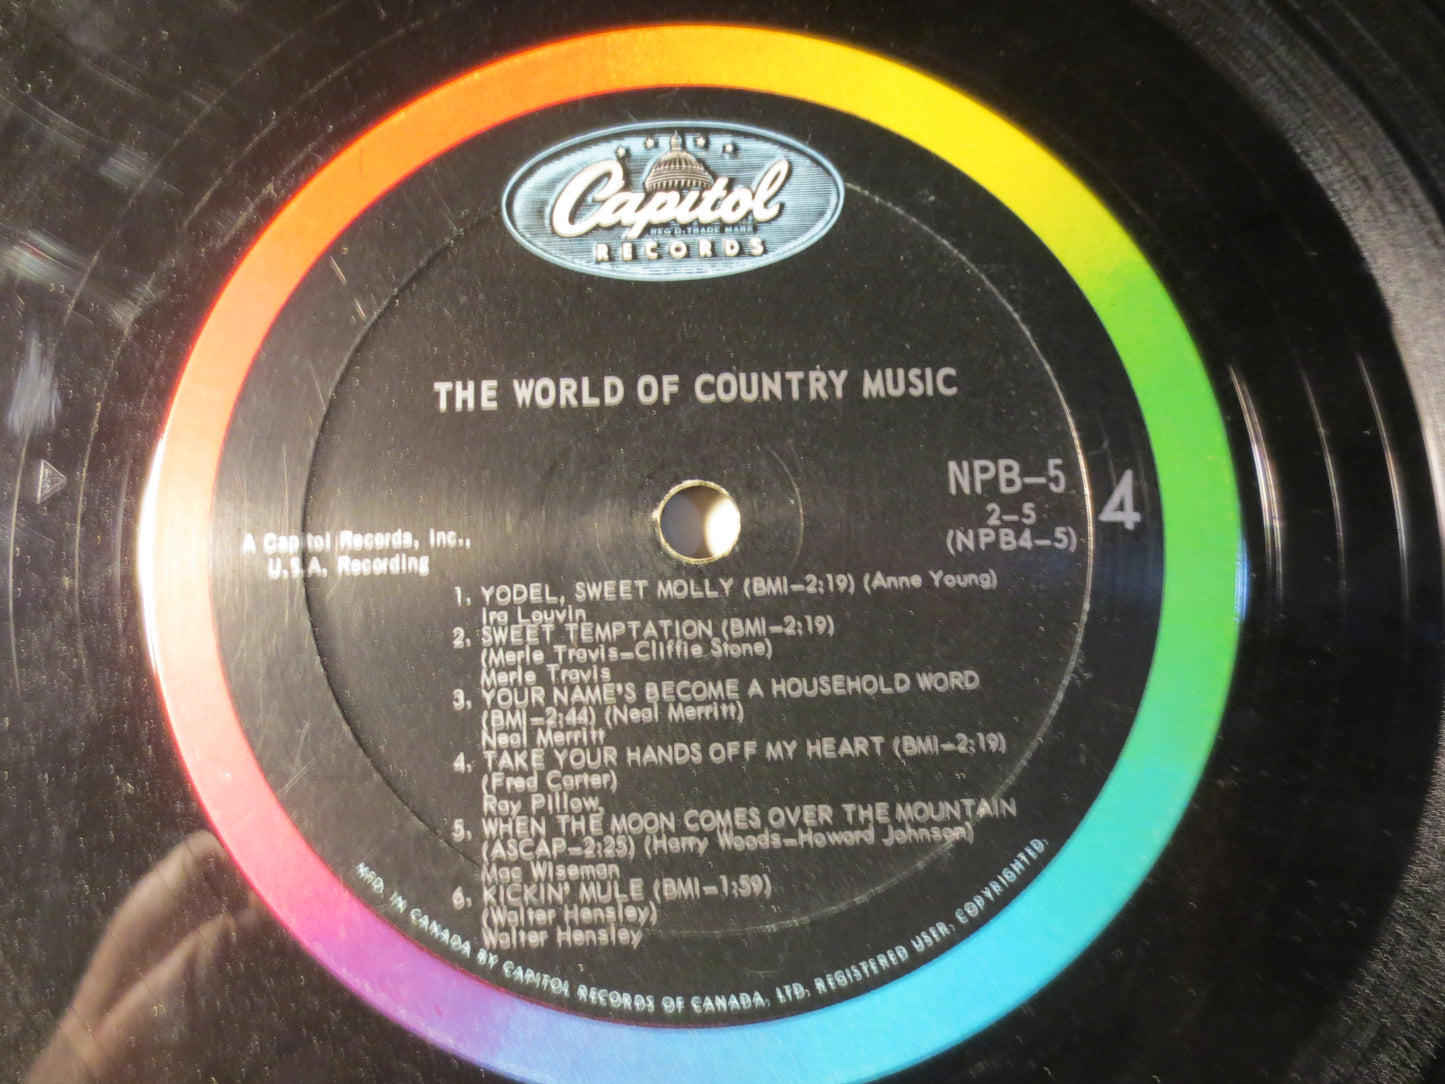 The WORLD of COUNTRY MUSIC, Double Record, Country Record, Vintage Vinyl, Record Vinyl, Records, Vinyl Record, 1965 Records